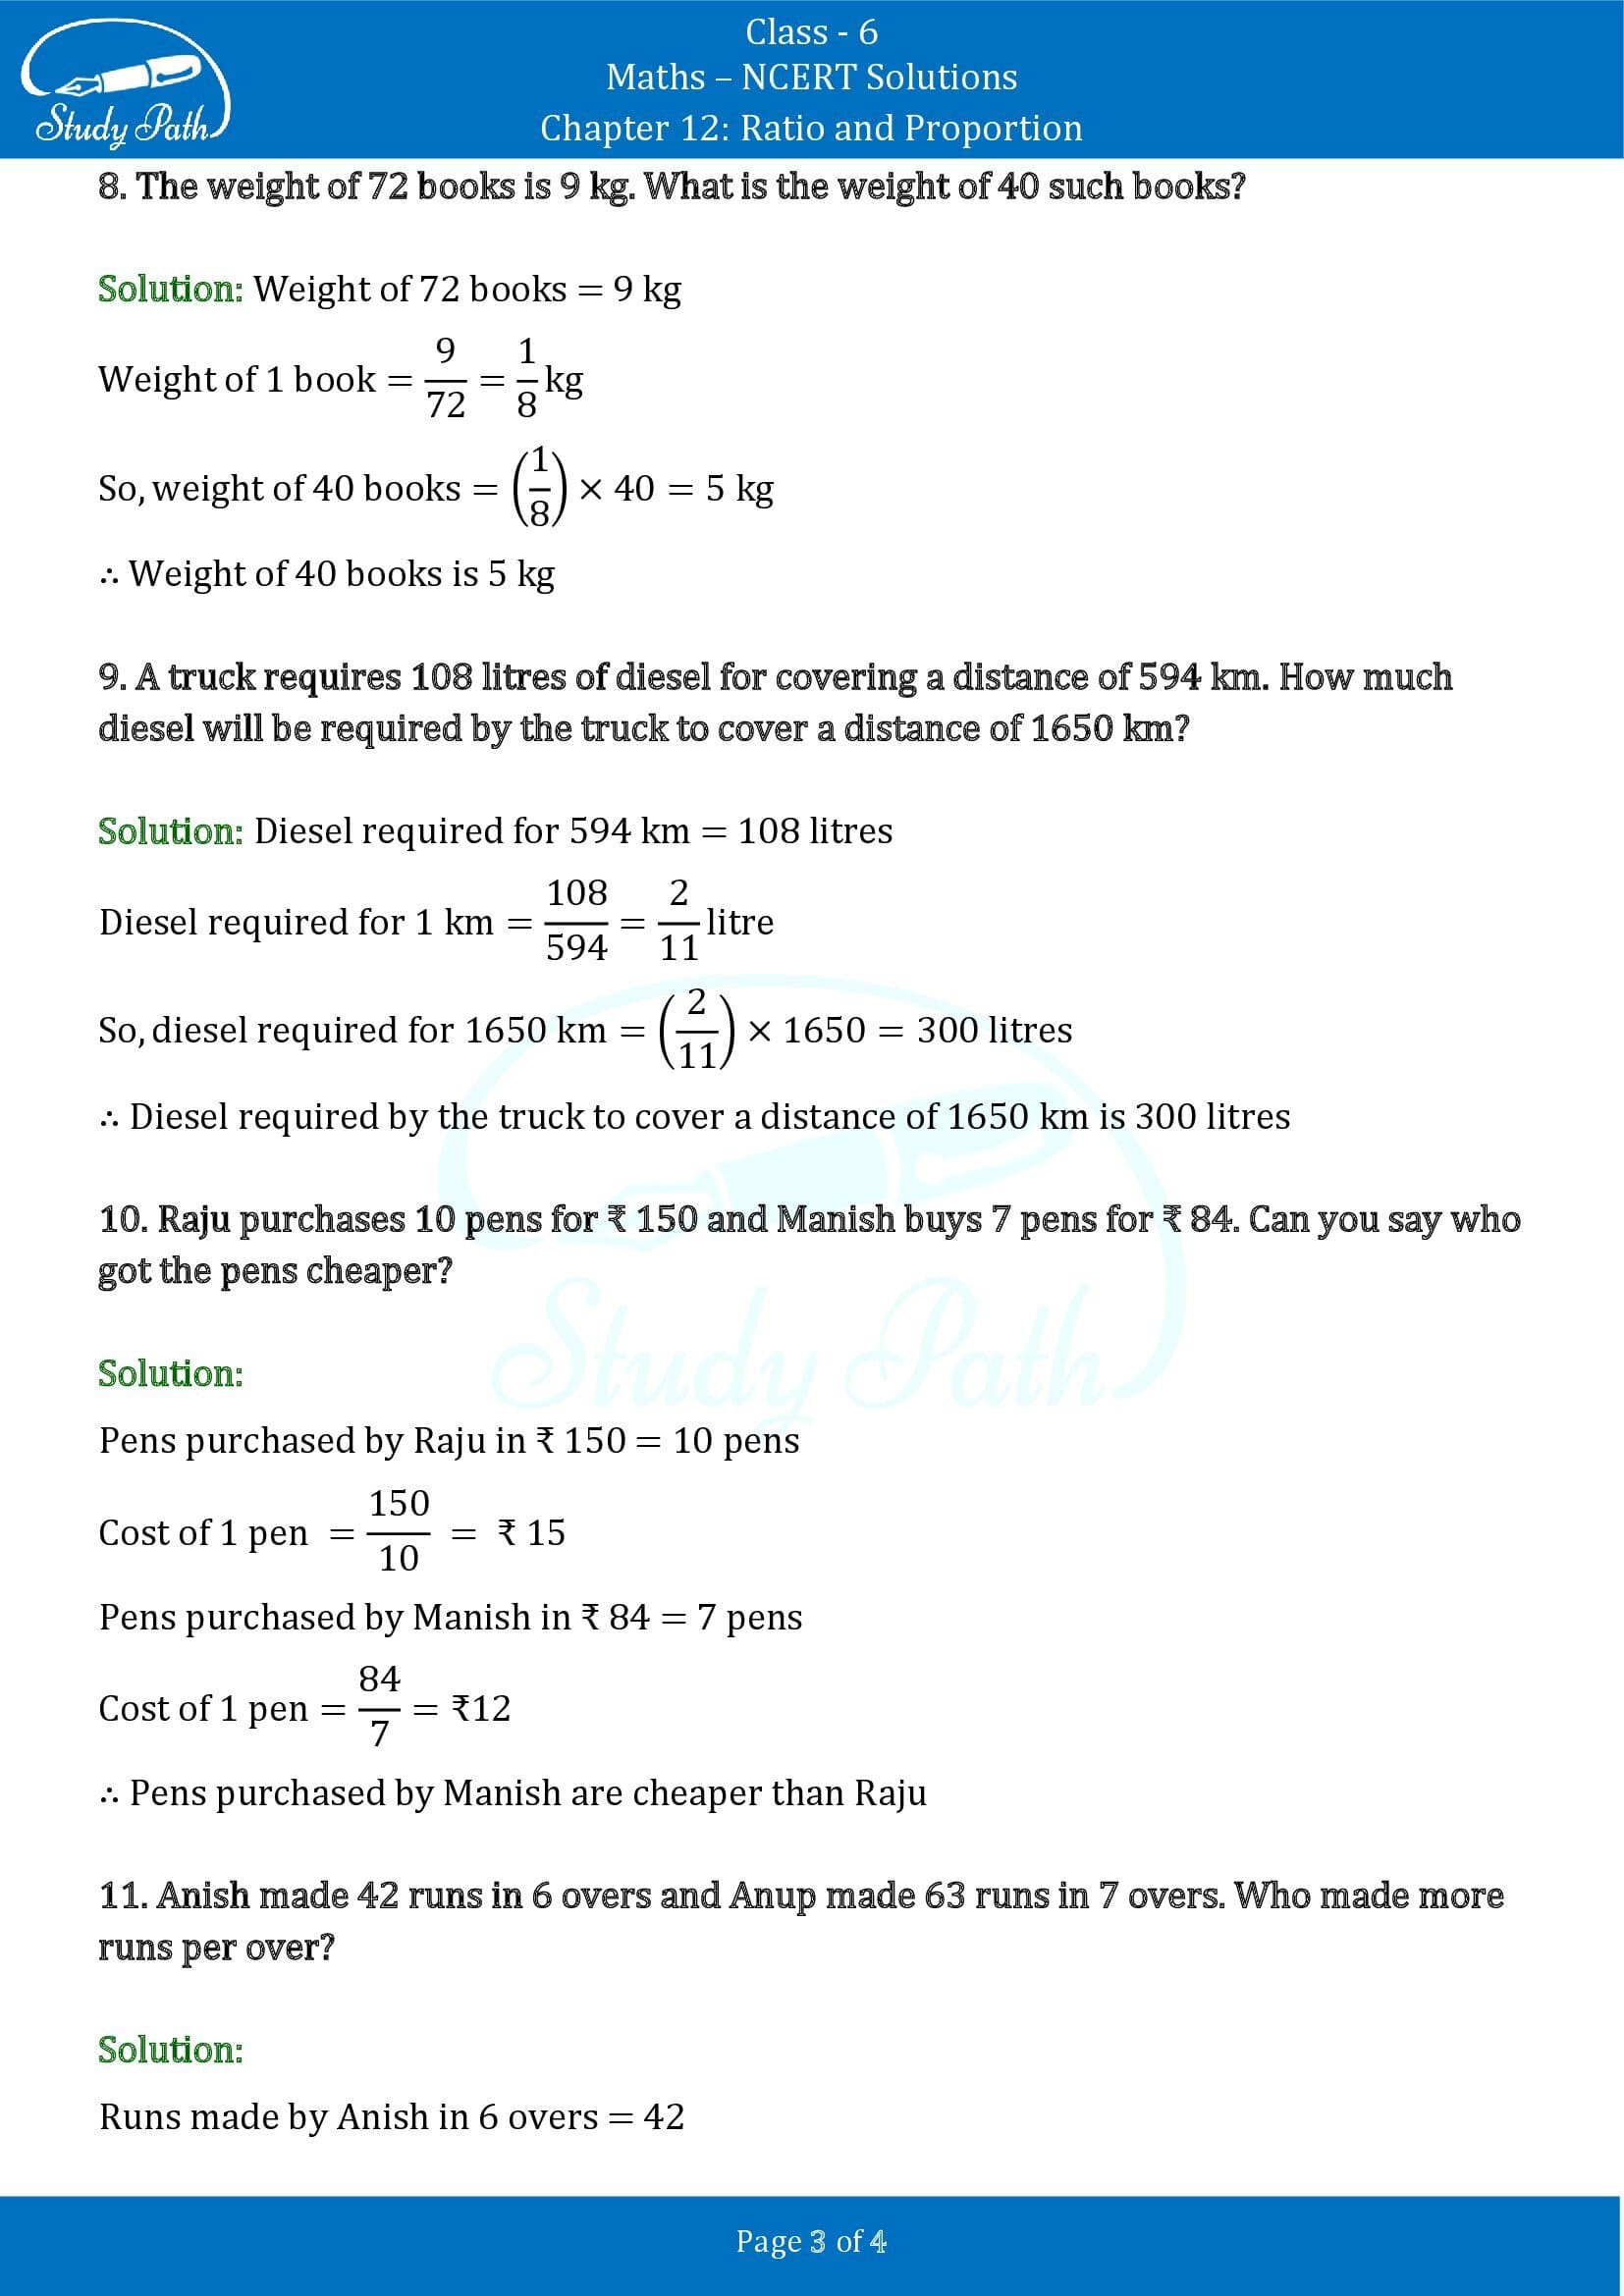 NCERT Solutions for Class 6 Maths Chapter 12 Ratio and Proportion Exercise 12.3 00003